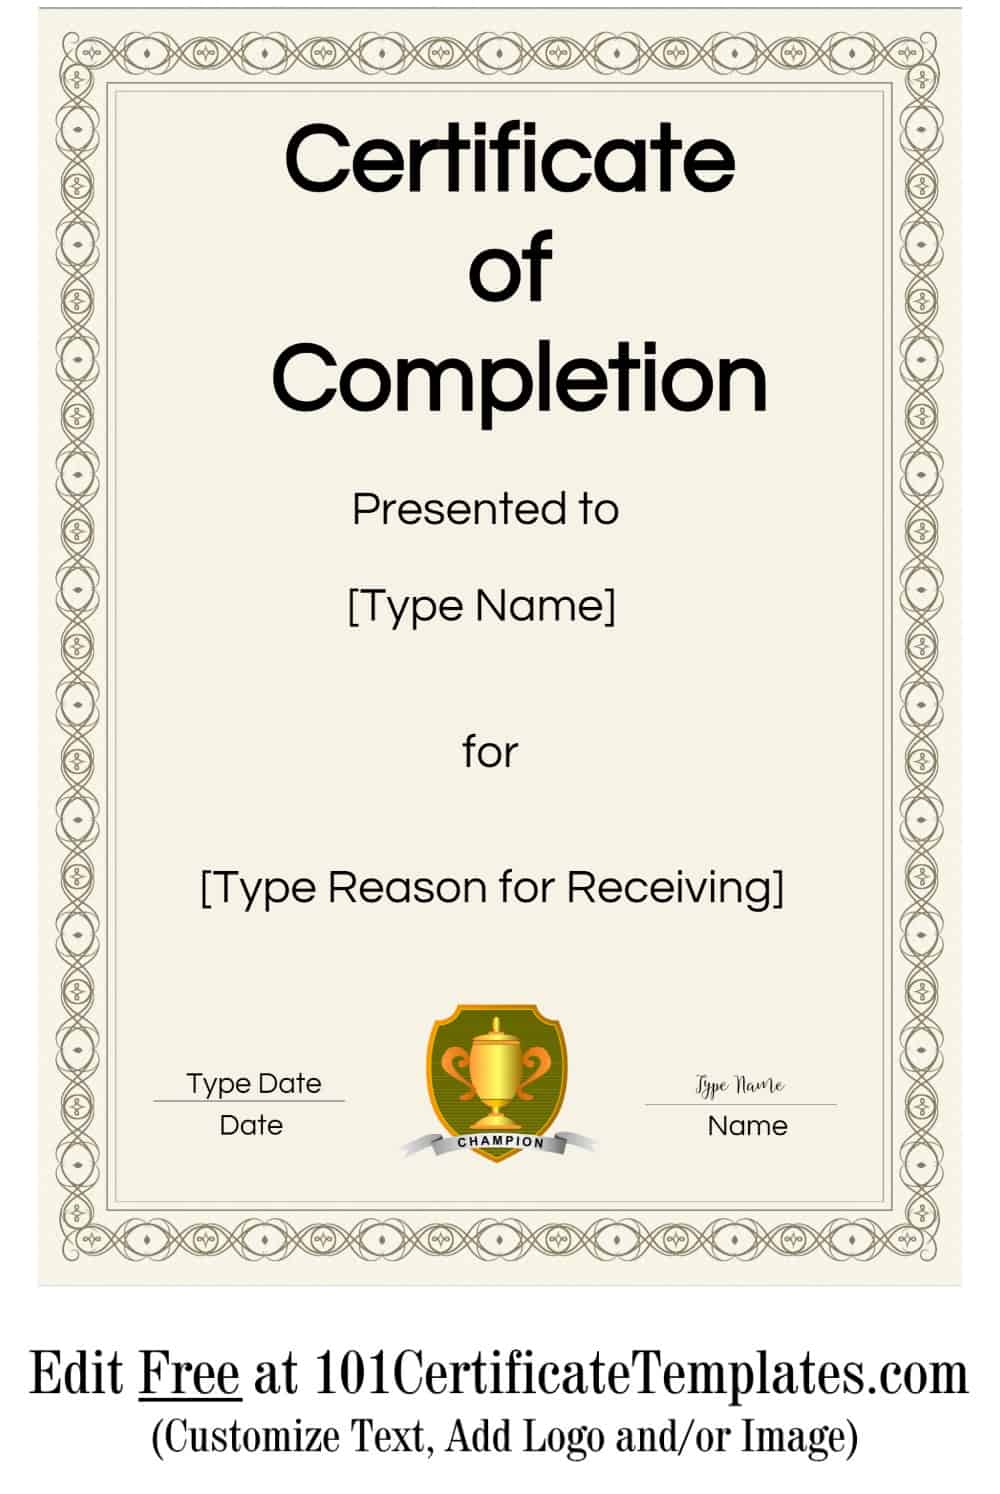 Free-Certificate-of-Completion-|-Customize-Online-then-Print